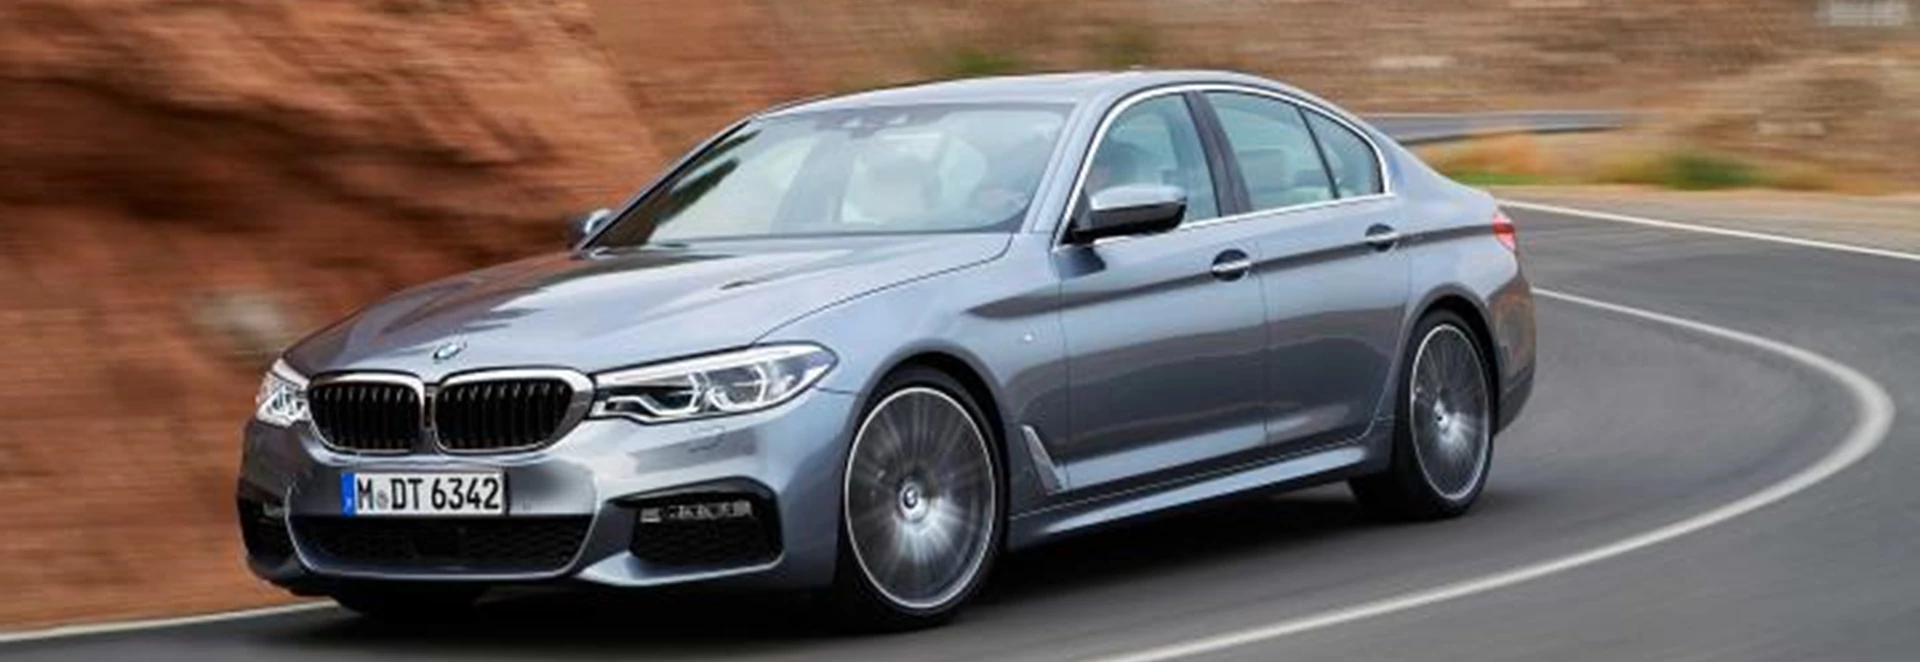 Here is the 2017 BMW 5 Series